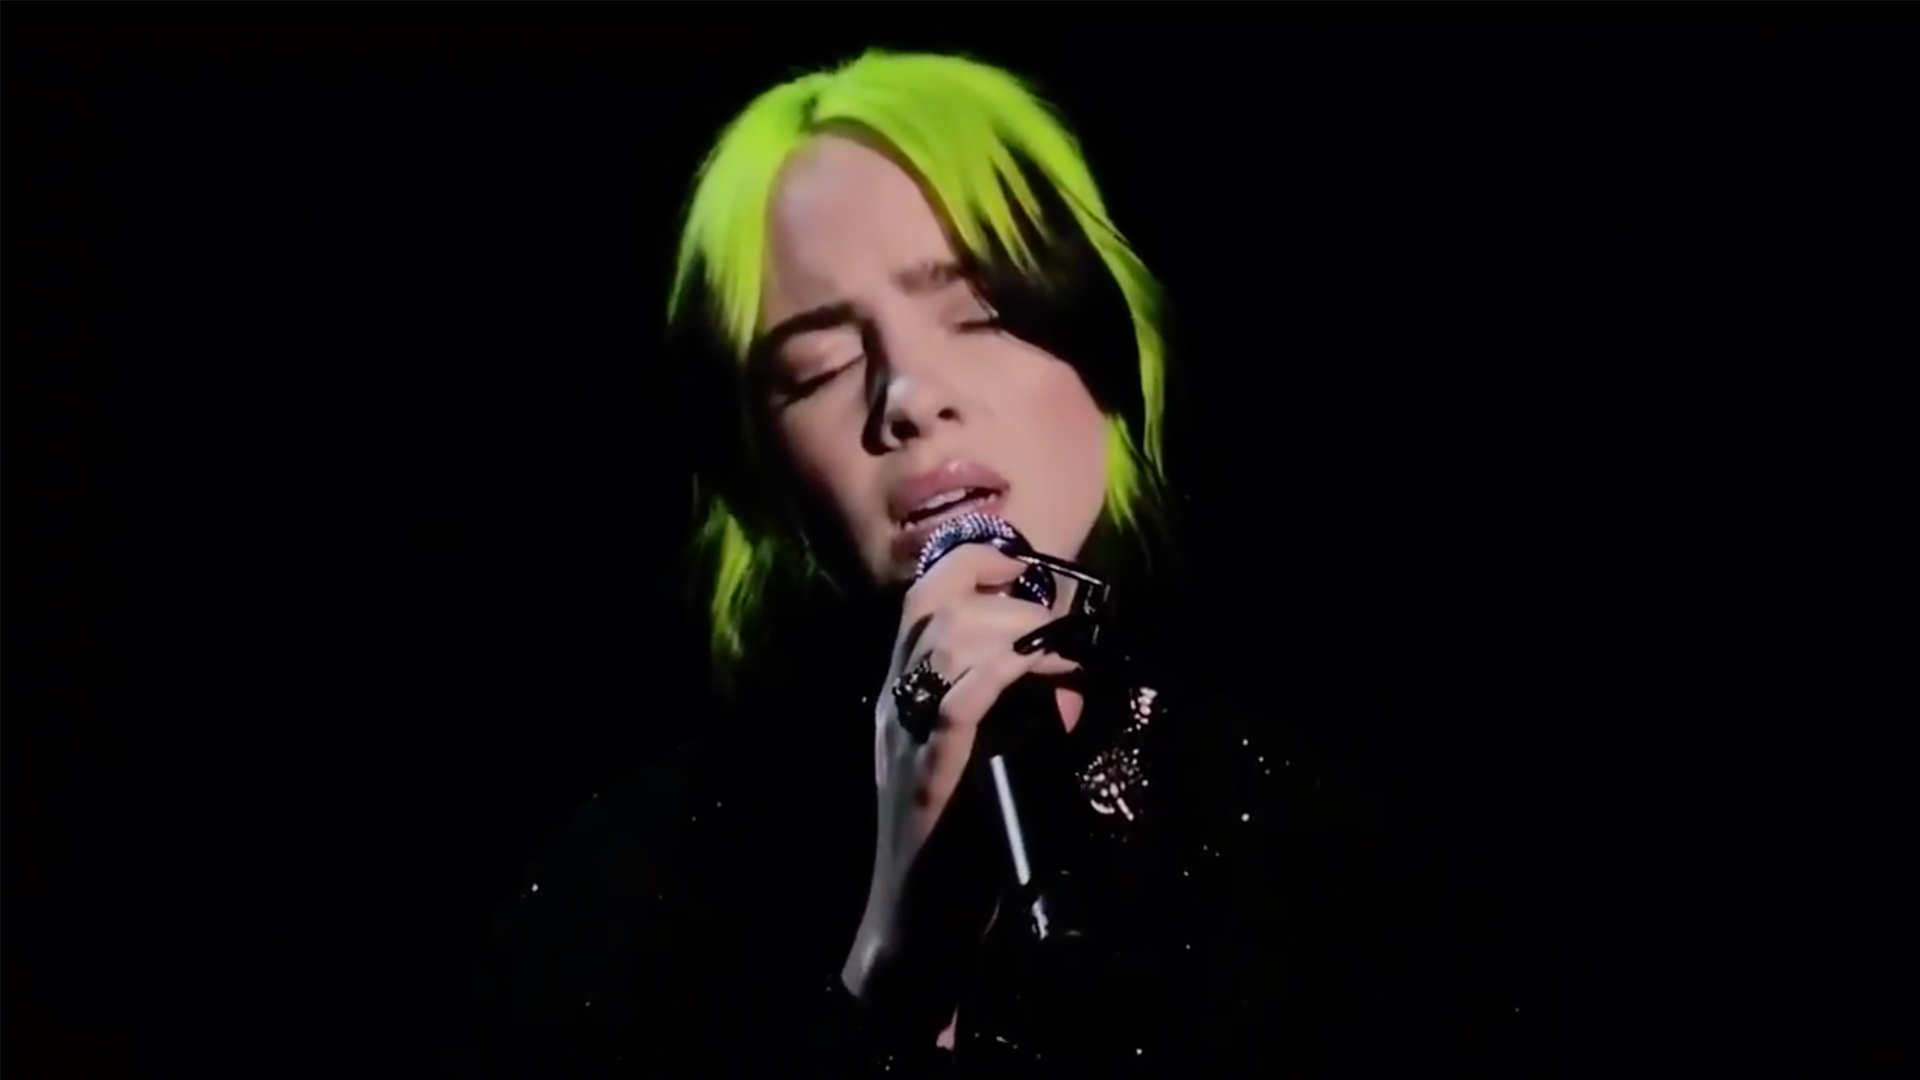 Hear Billie Eilish's Moving Cover Of The Beatles At The Oscars